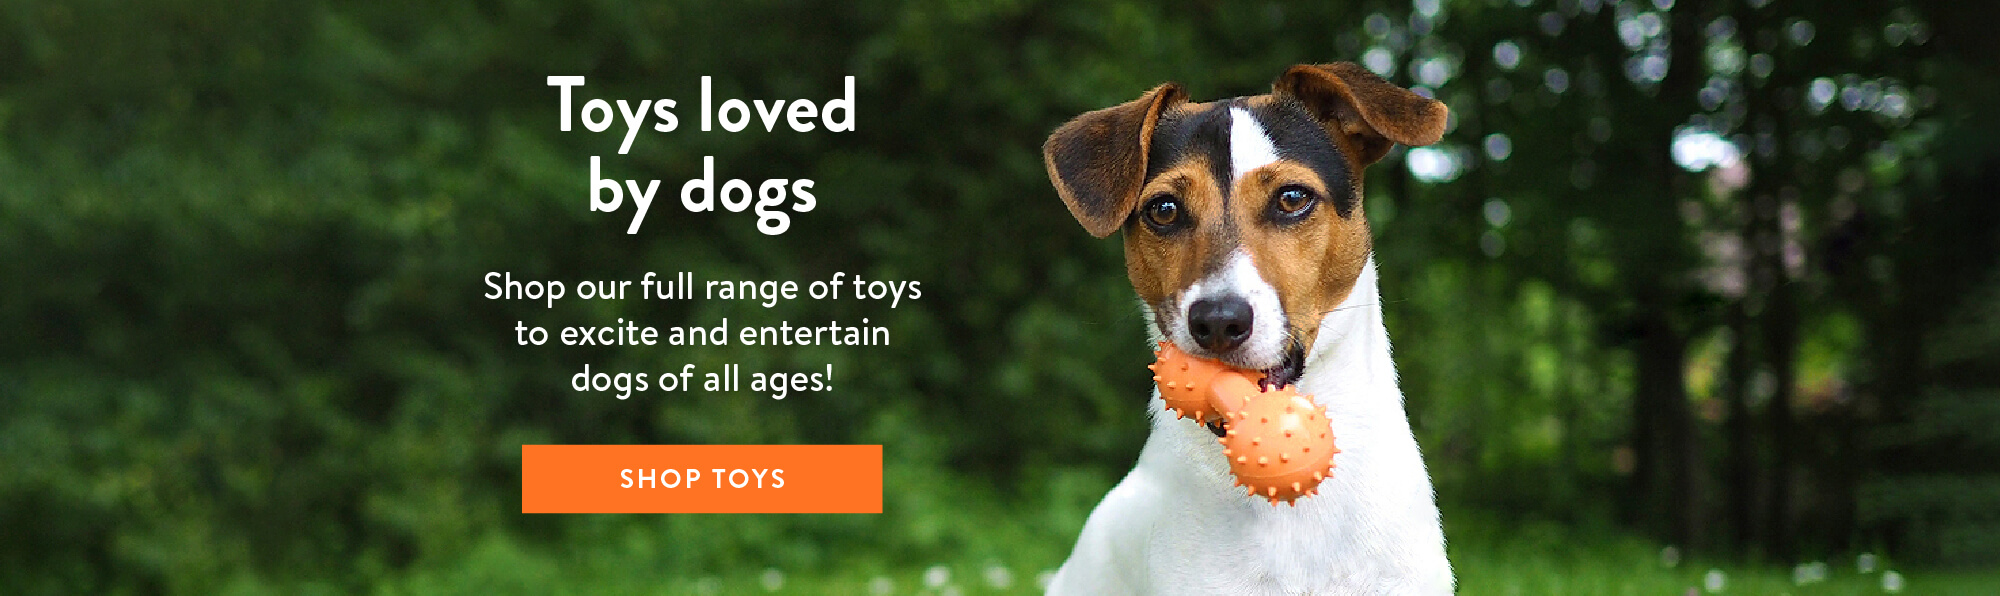 Toys loved by dogs